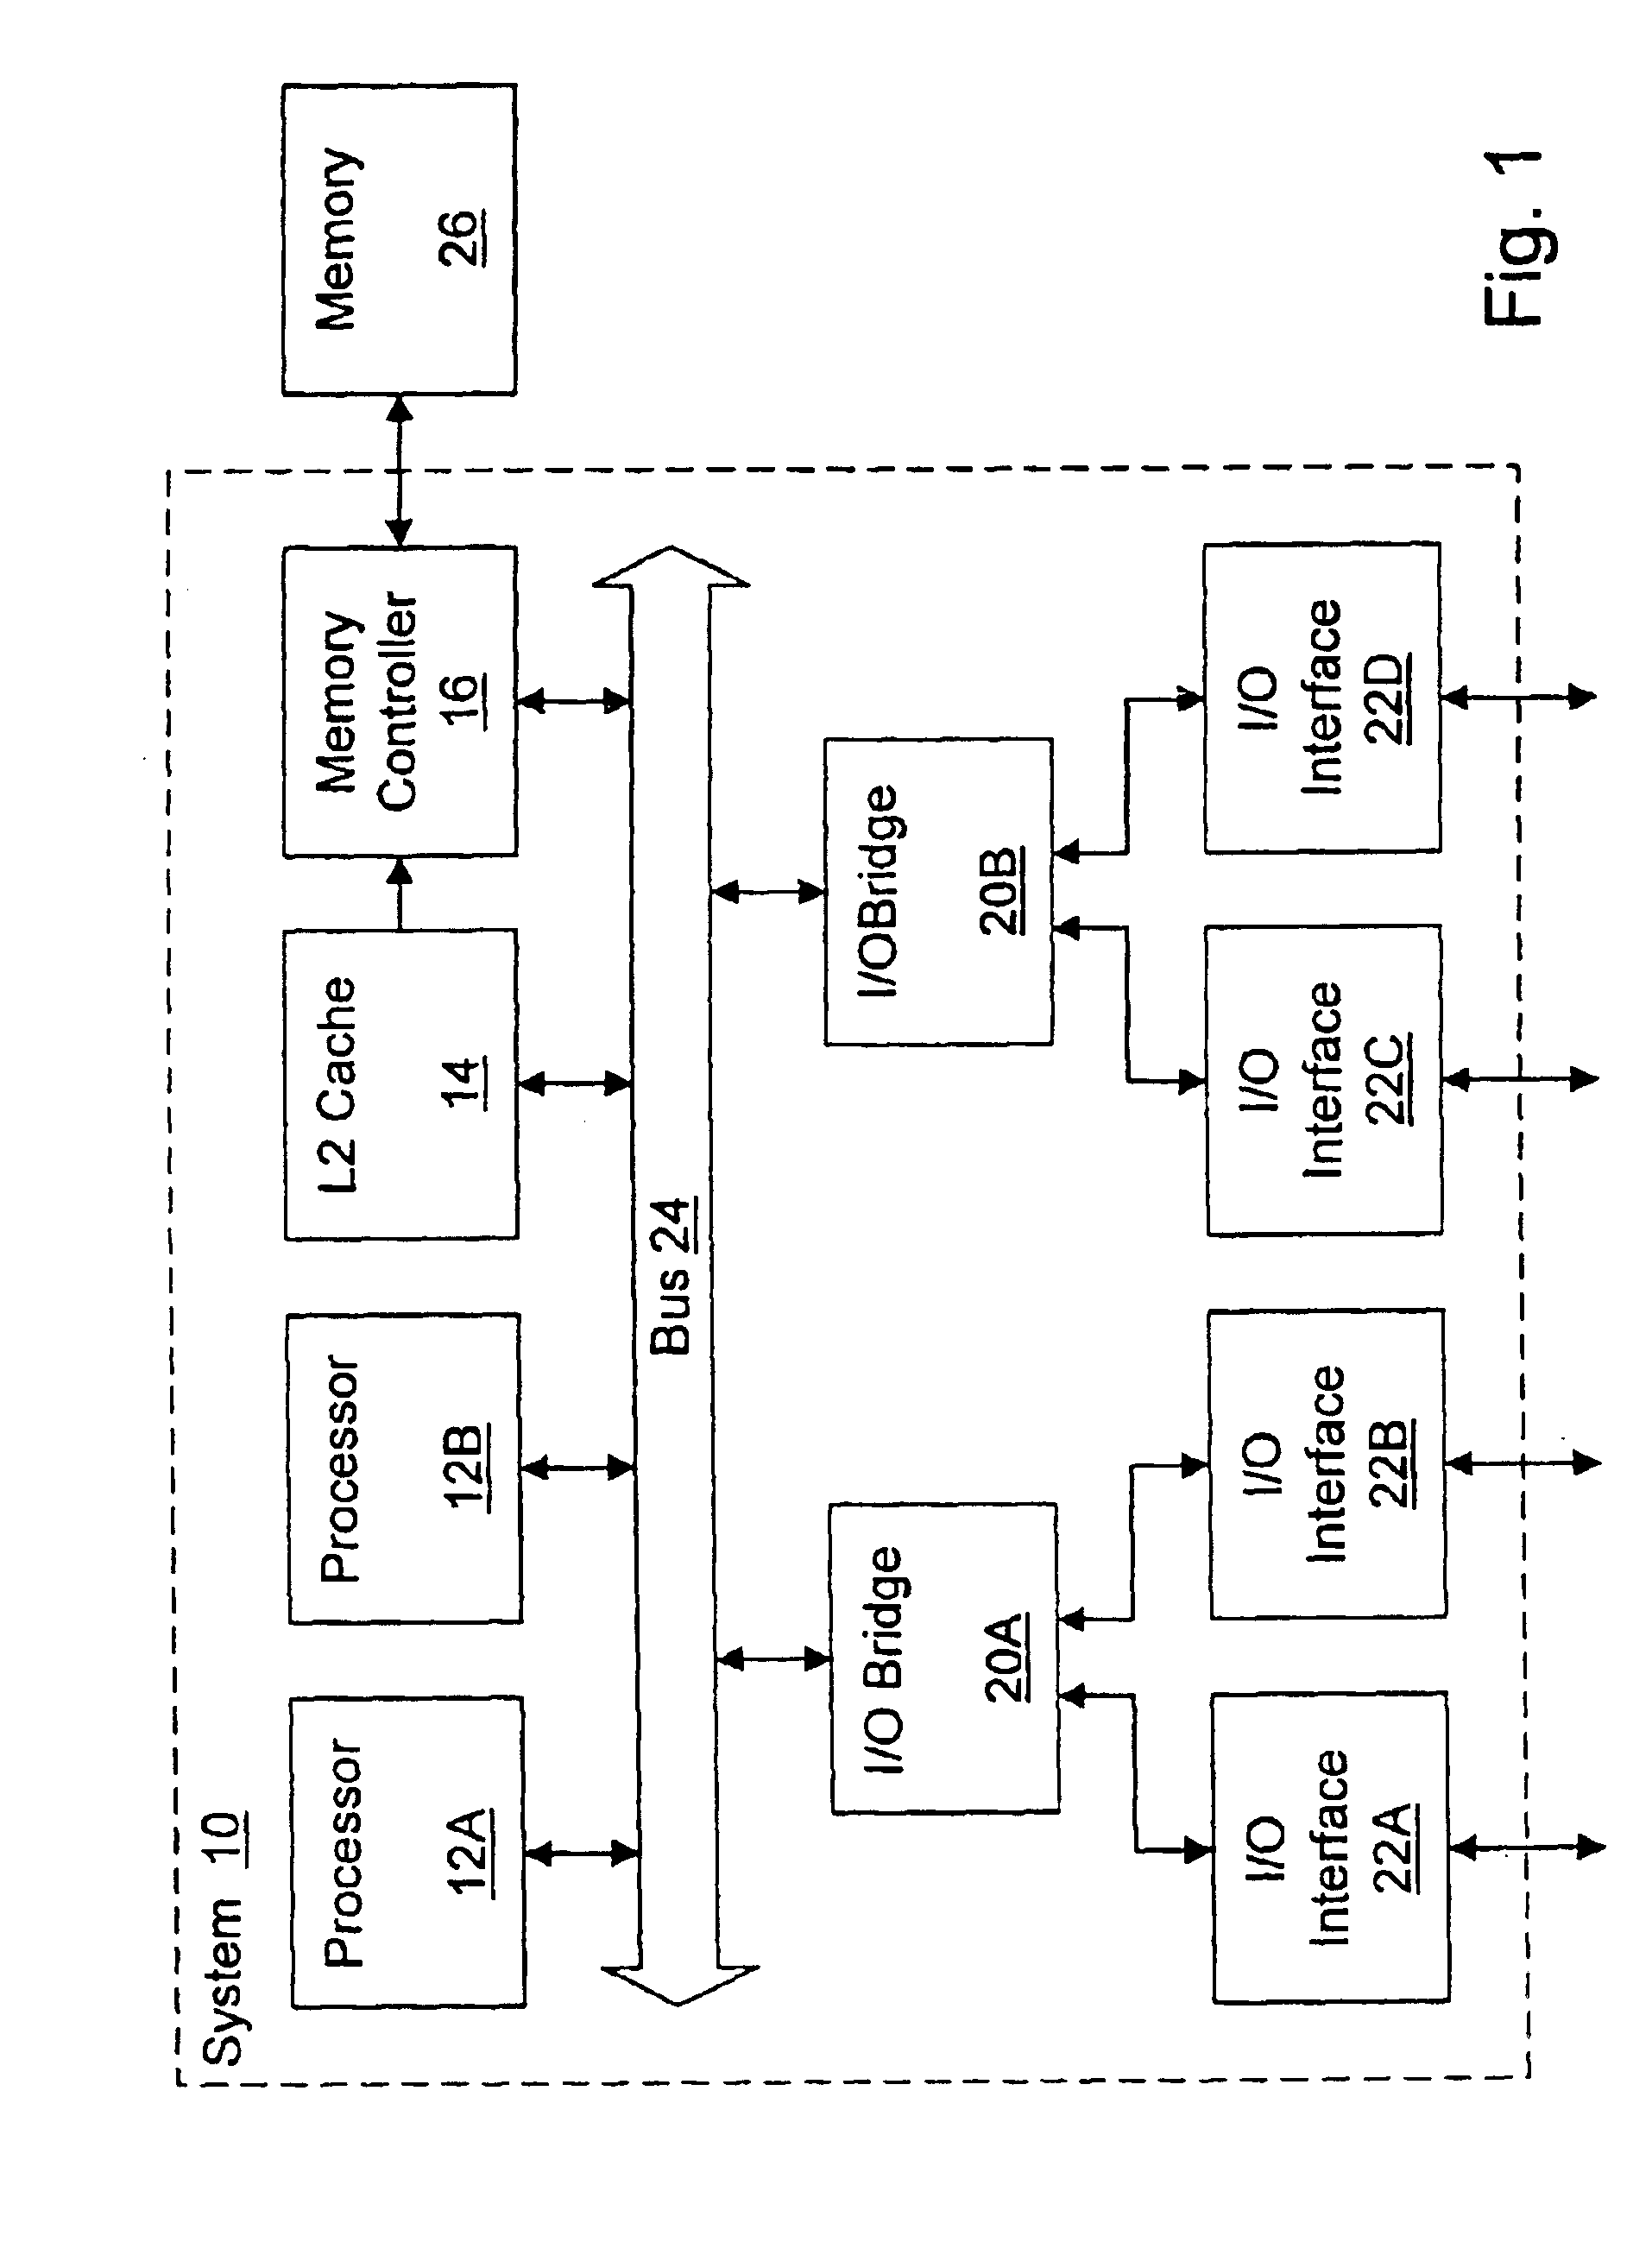 Memory controller with programmable configuration